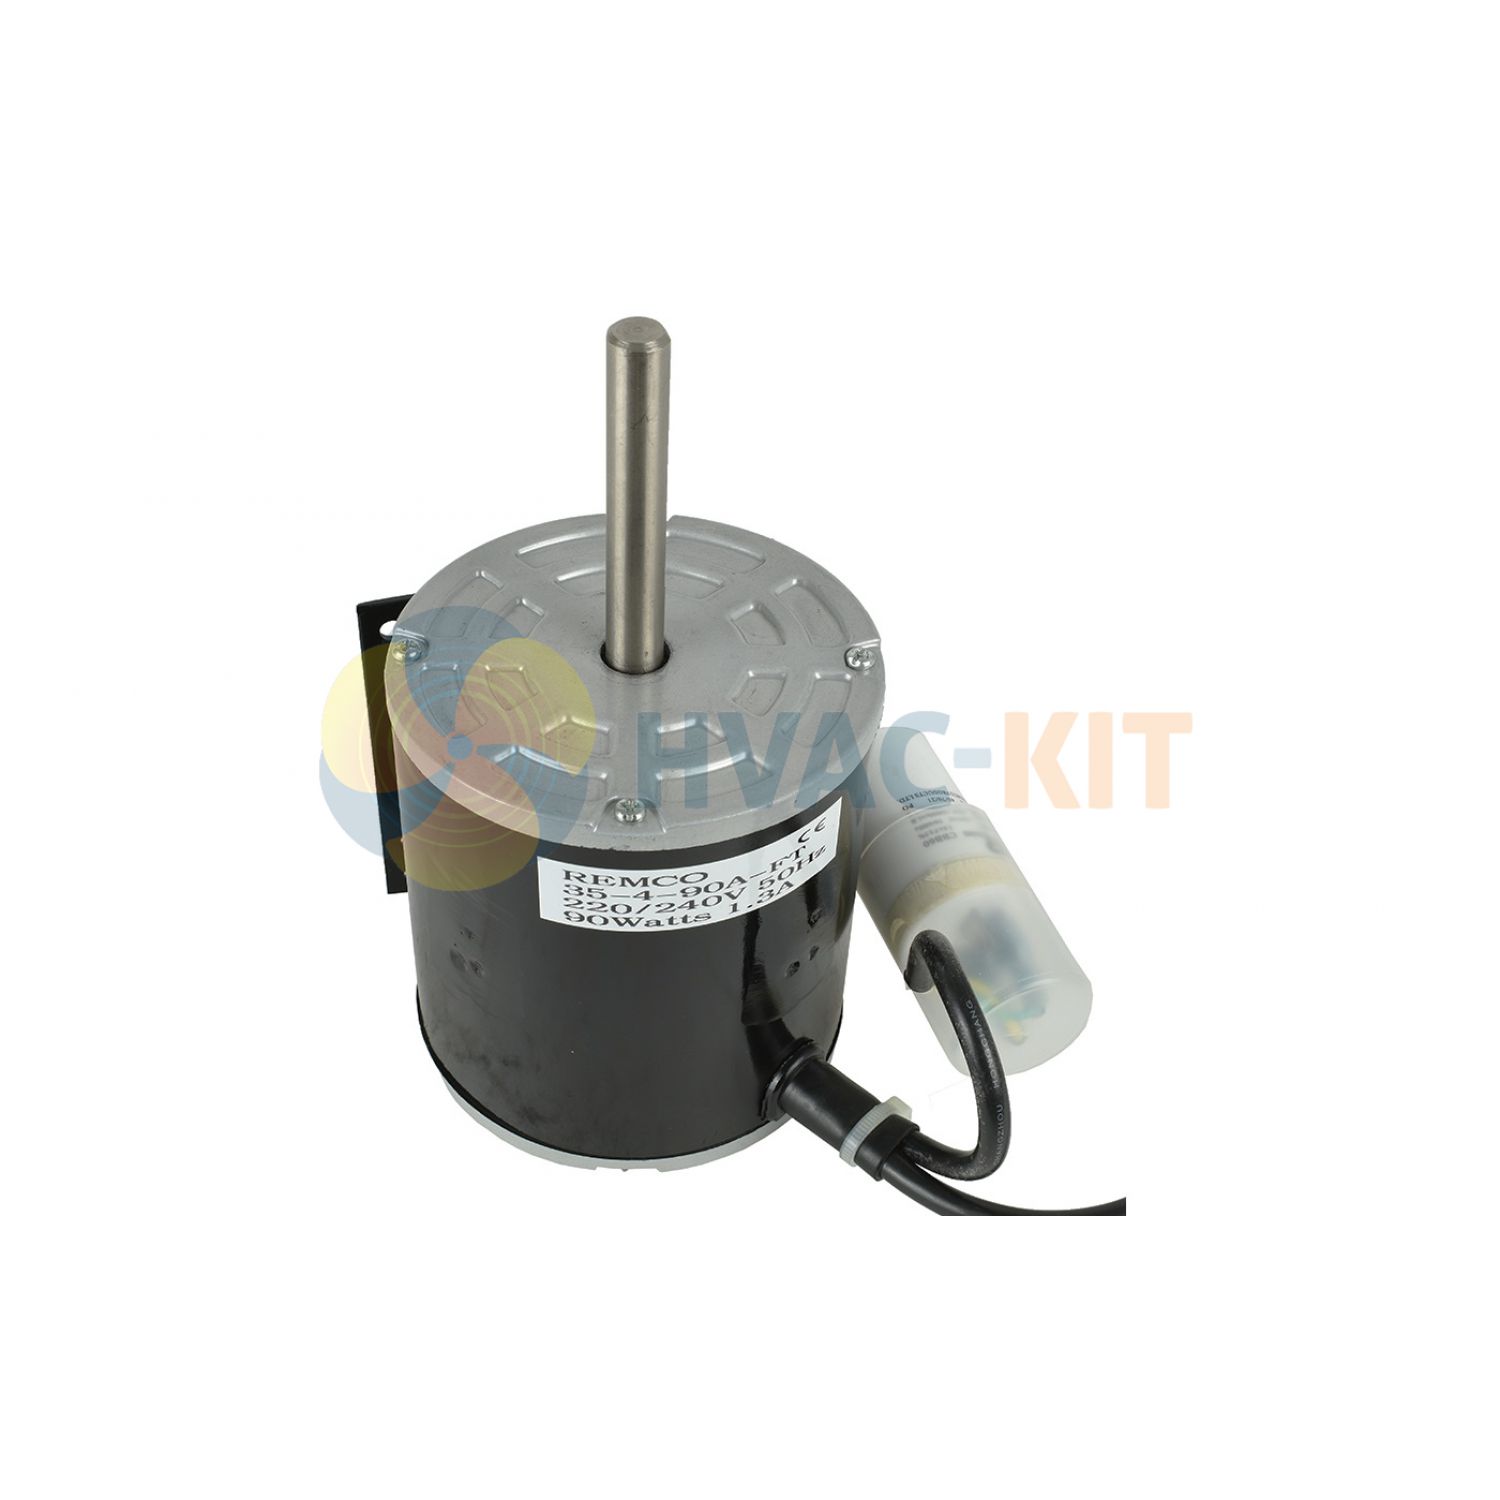 35-4-90AB-FT_4 Solid Foot Mount Motor